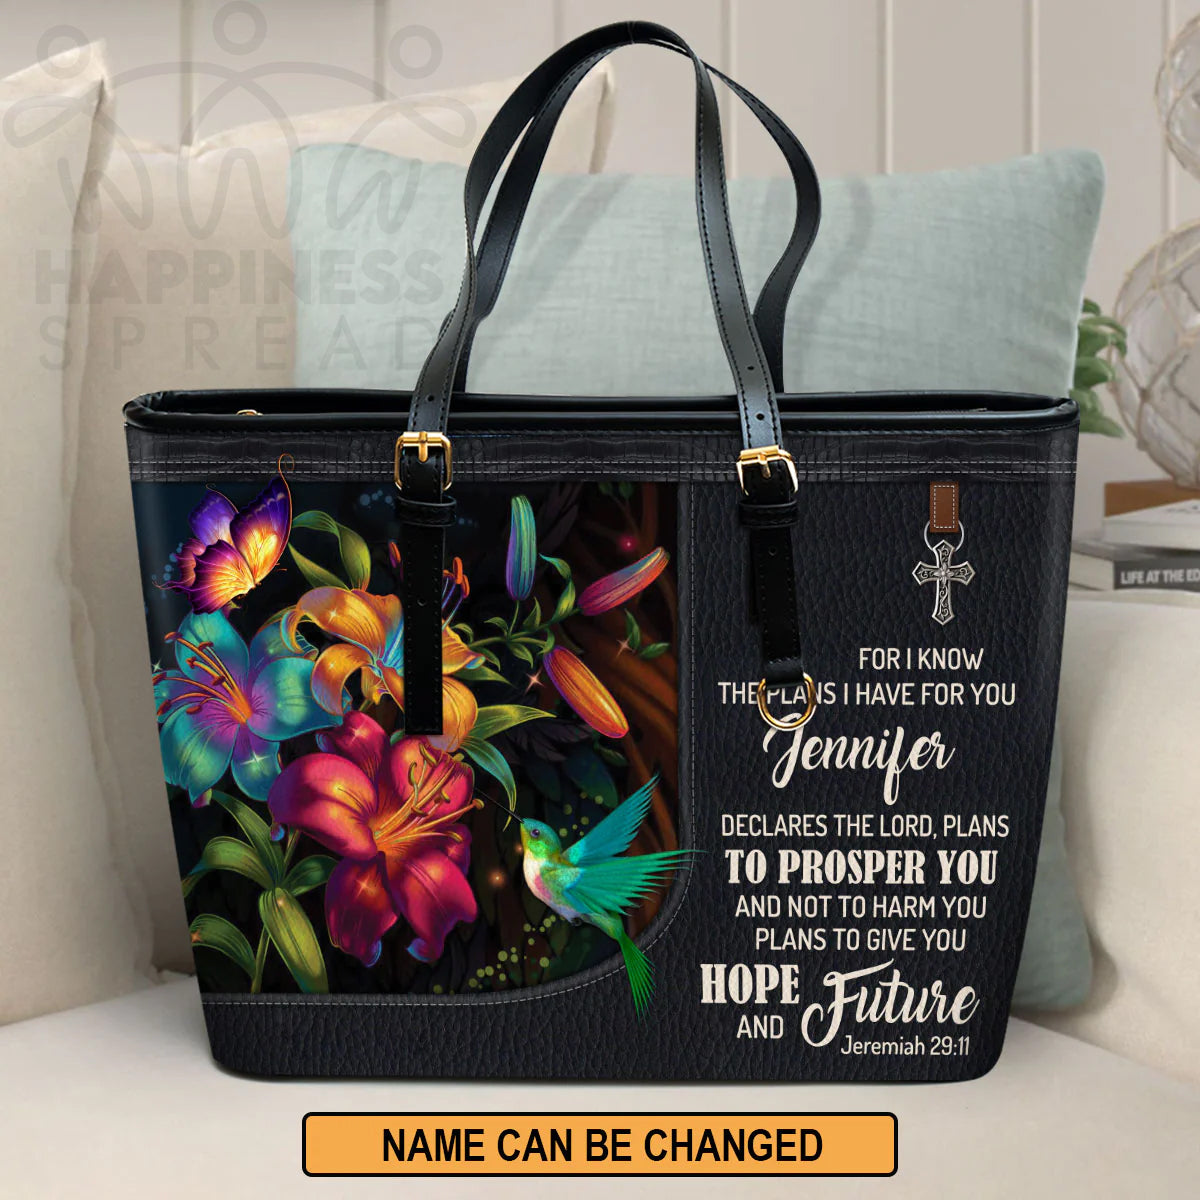 Christianart Handbag, Personalized Hand Bag, For I Know The Plans I Have For You, Personalized Gifts, Gifts for Women. - Christian Art Bag